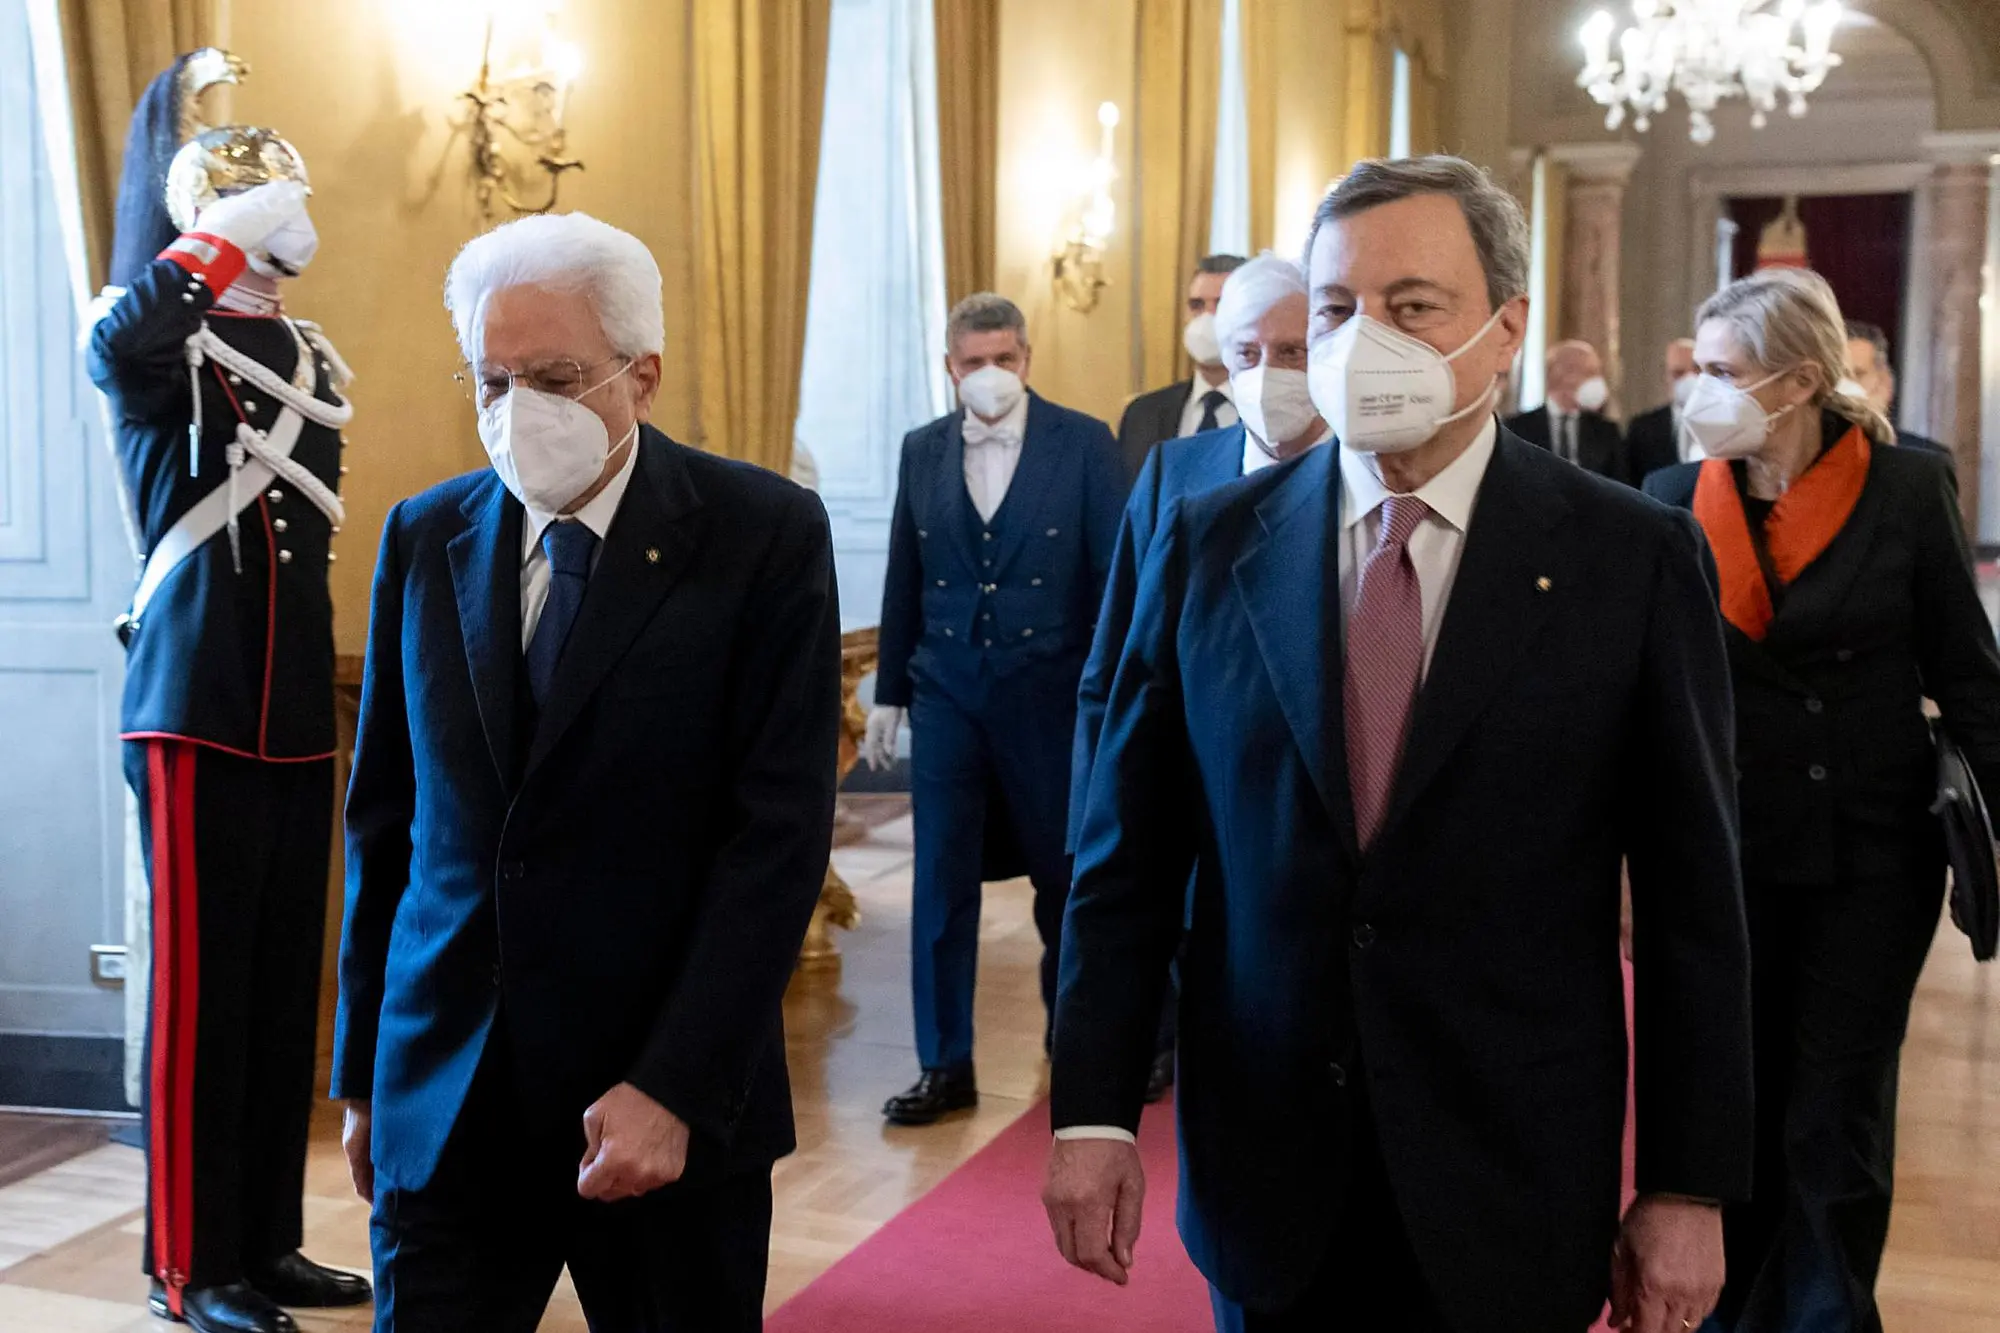 Italian President Sergio Mattarella (L) with Italian Prime Minister Mario Draghi (R) during new government swearing-in ceremony at Quirinal Palace, Rome, 13 February 2021. ANSA/FRANCESCO AMMENDOLA/QUIRINALE PRESS OFFICE ++ NO SALES, EDITORIAL USE ONLY +++